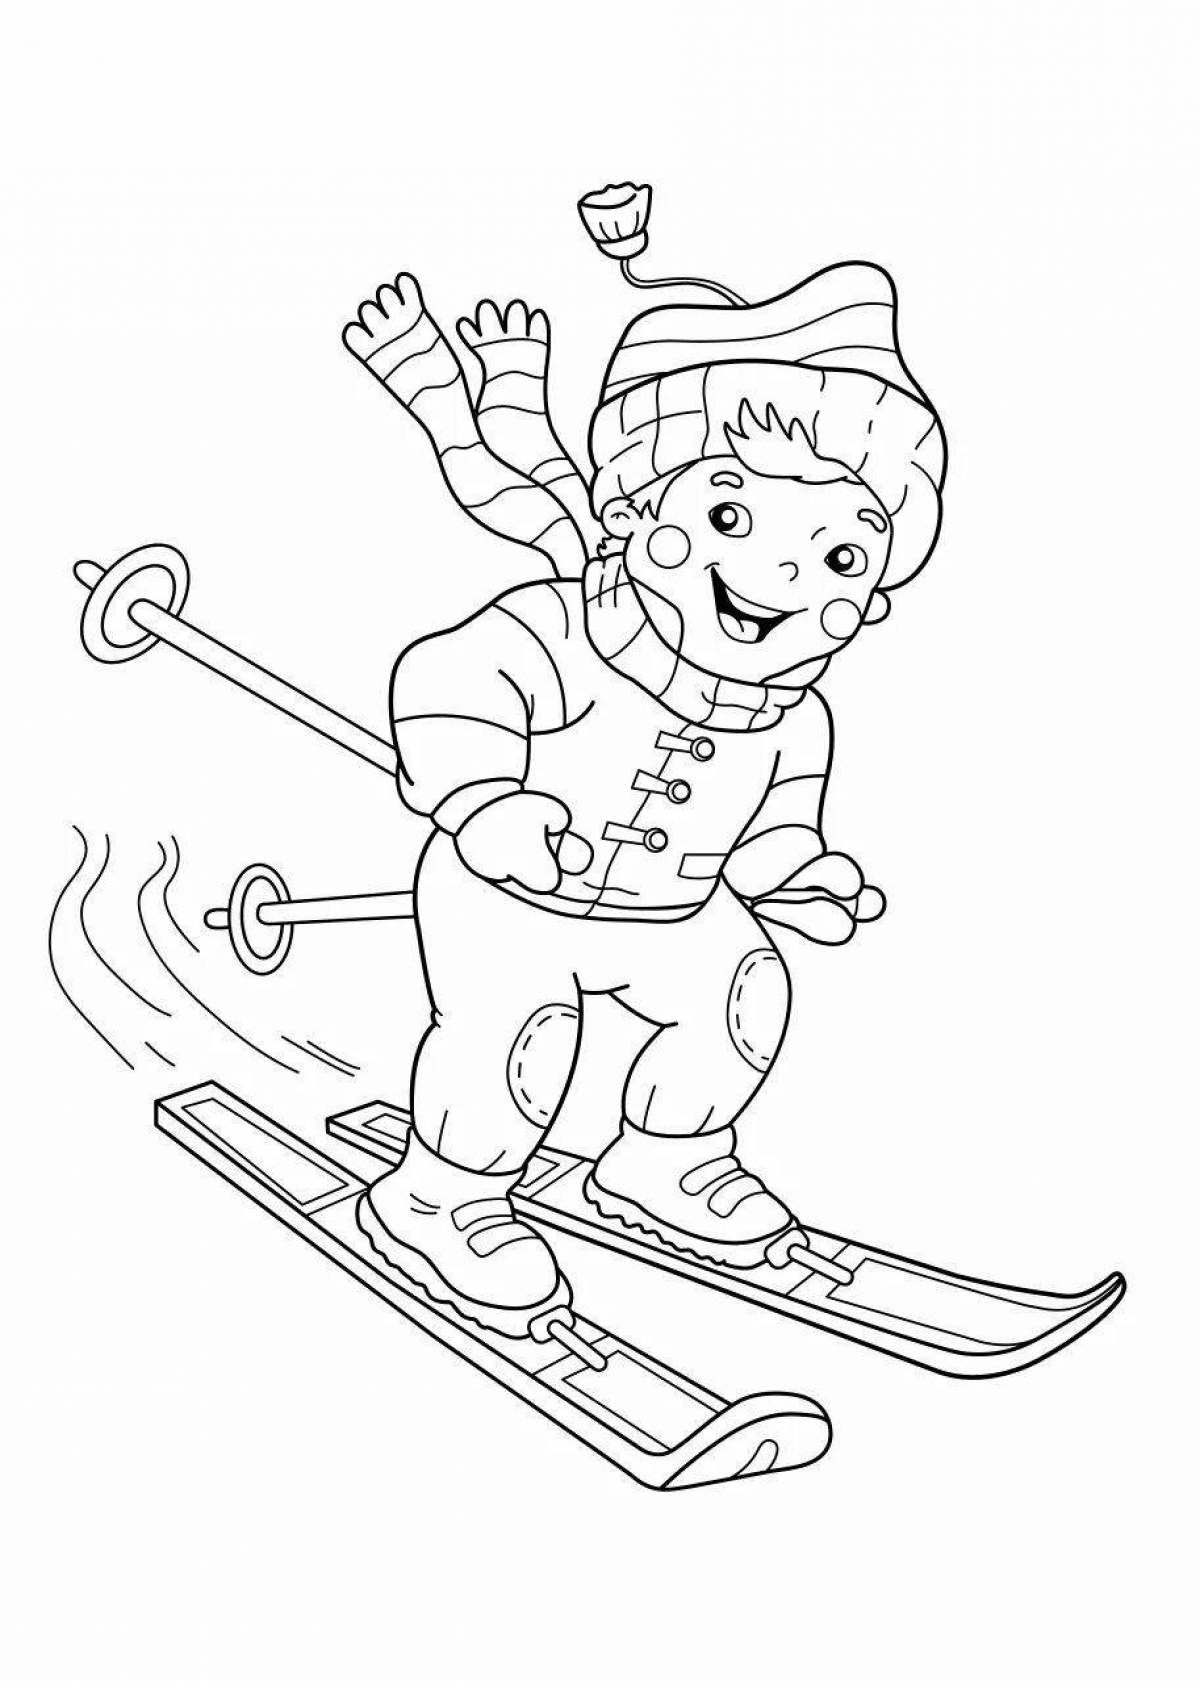 Coloring page energetic skier for kids